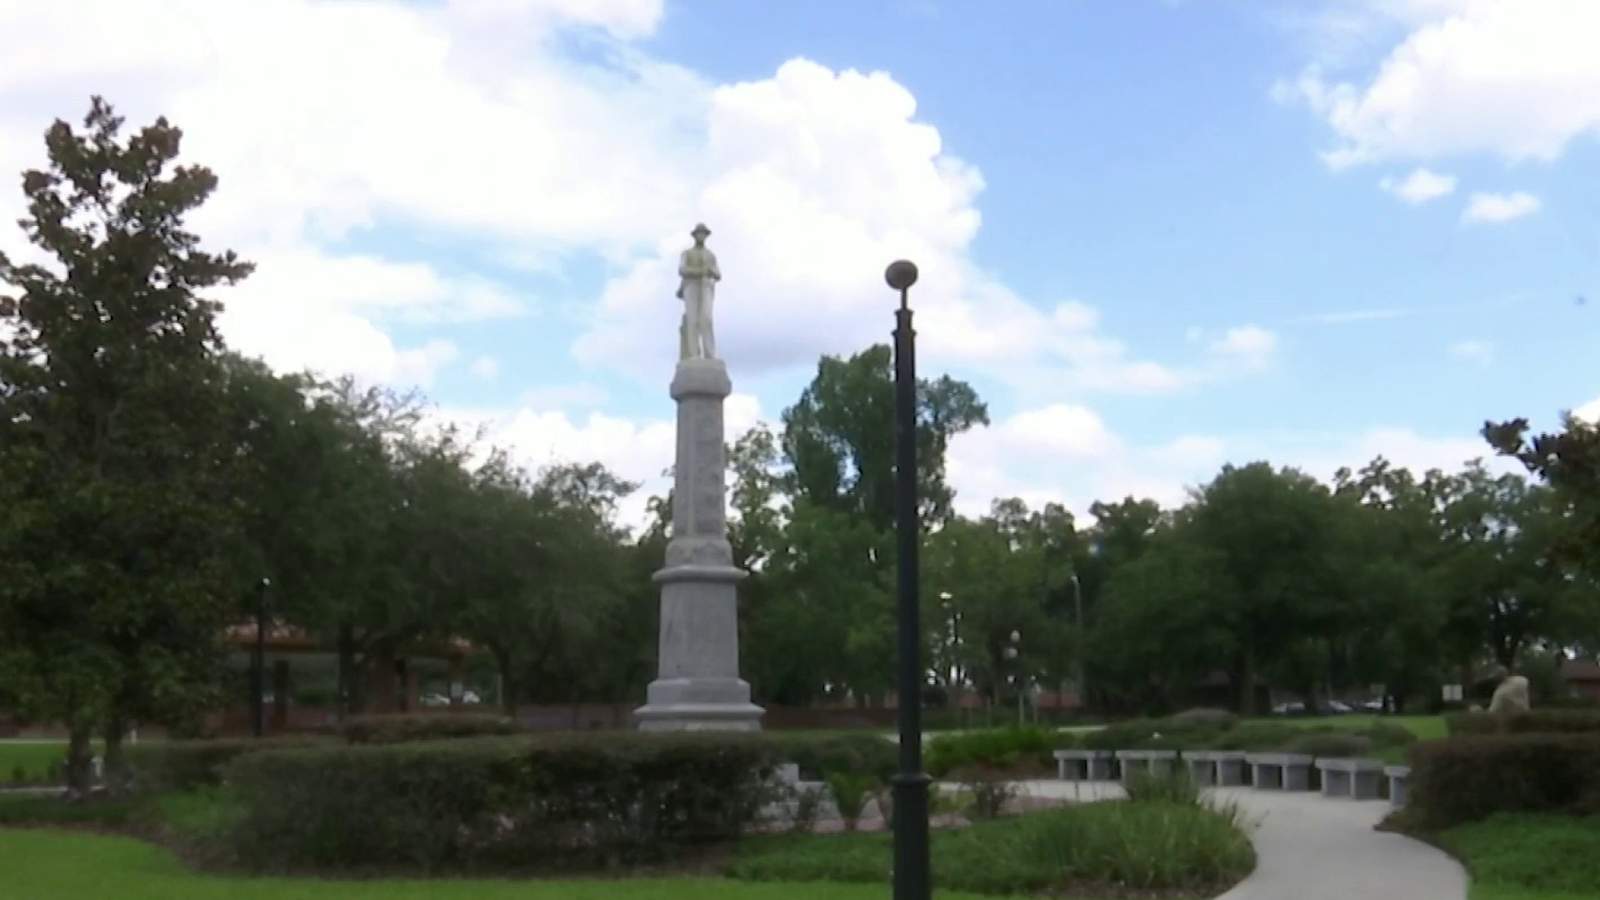 Most Confederate statues in Central Florida have been relocated